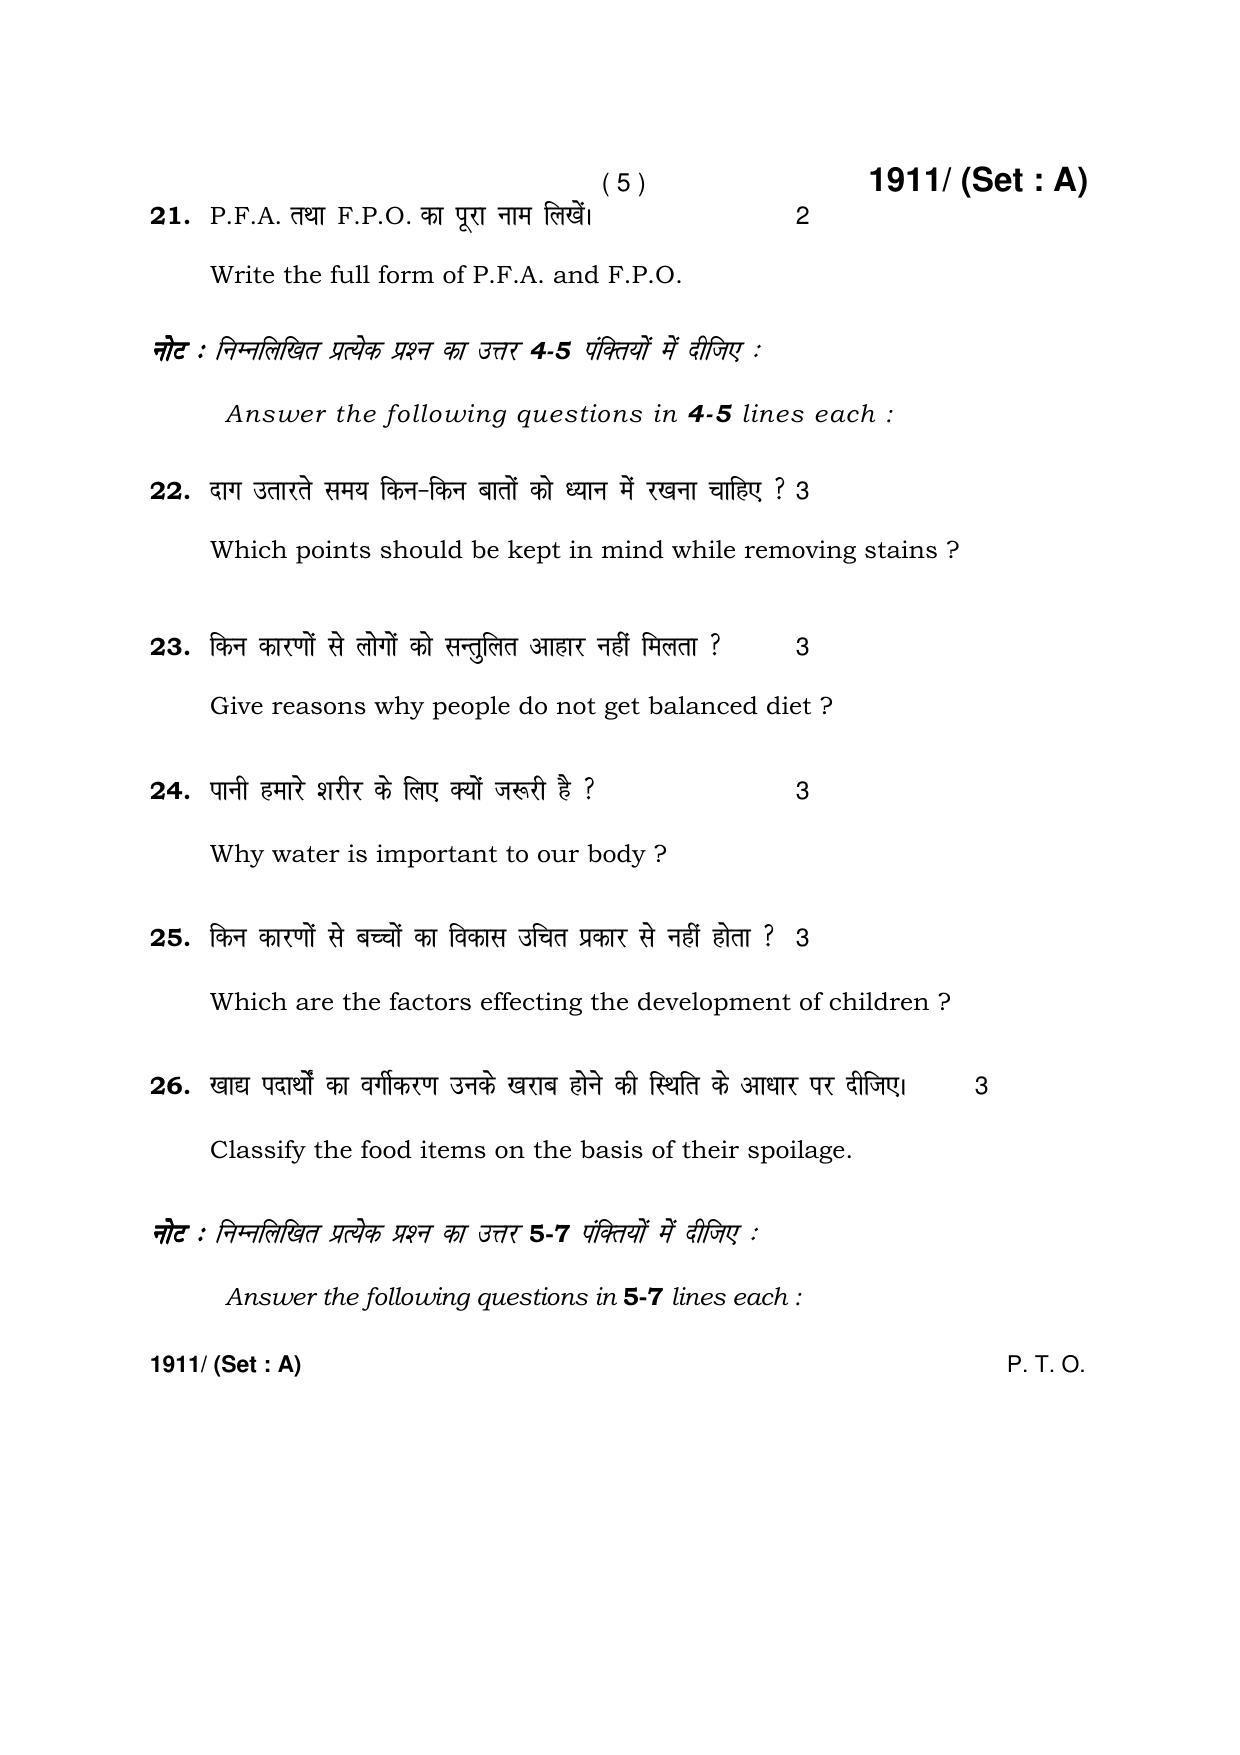 Haryana Board HBSE Class 10 Home Science -A 2017 Question Paper - Page 5